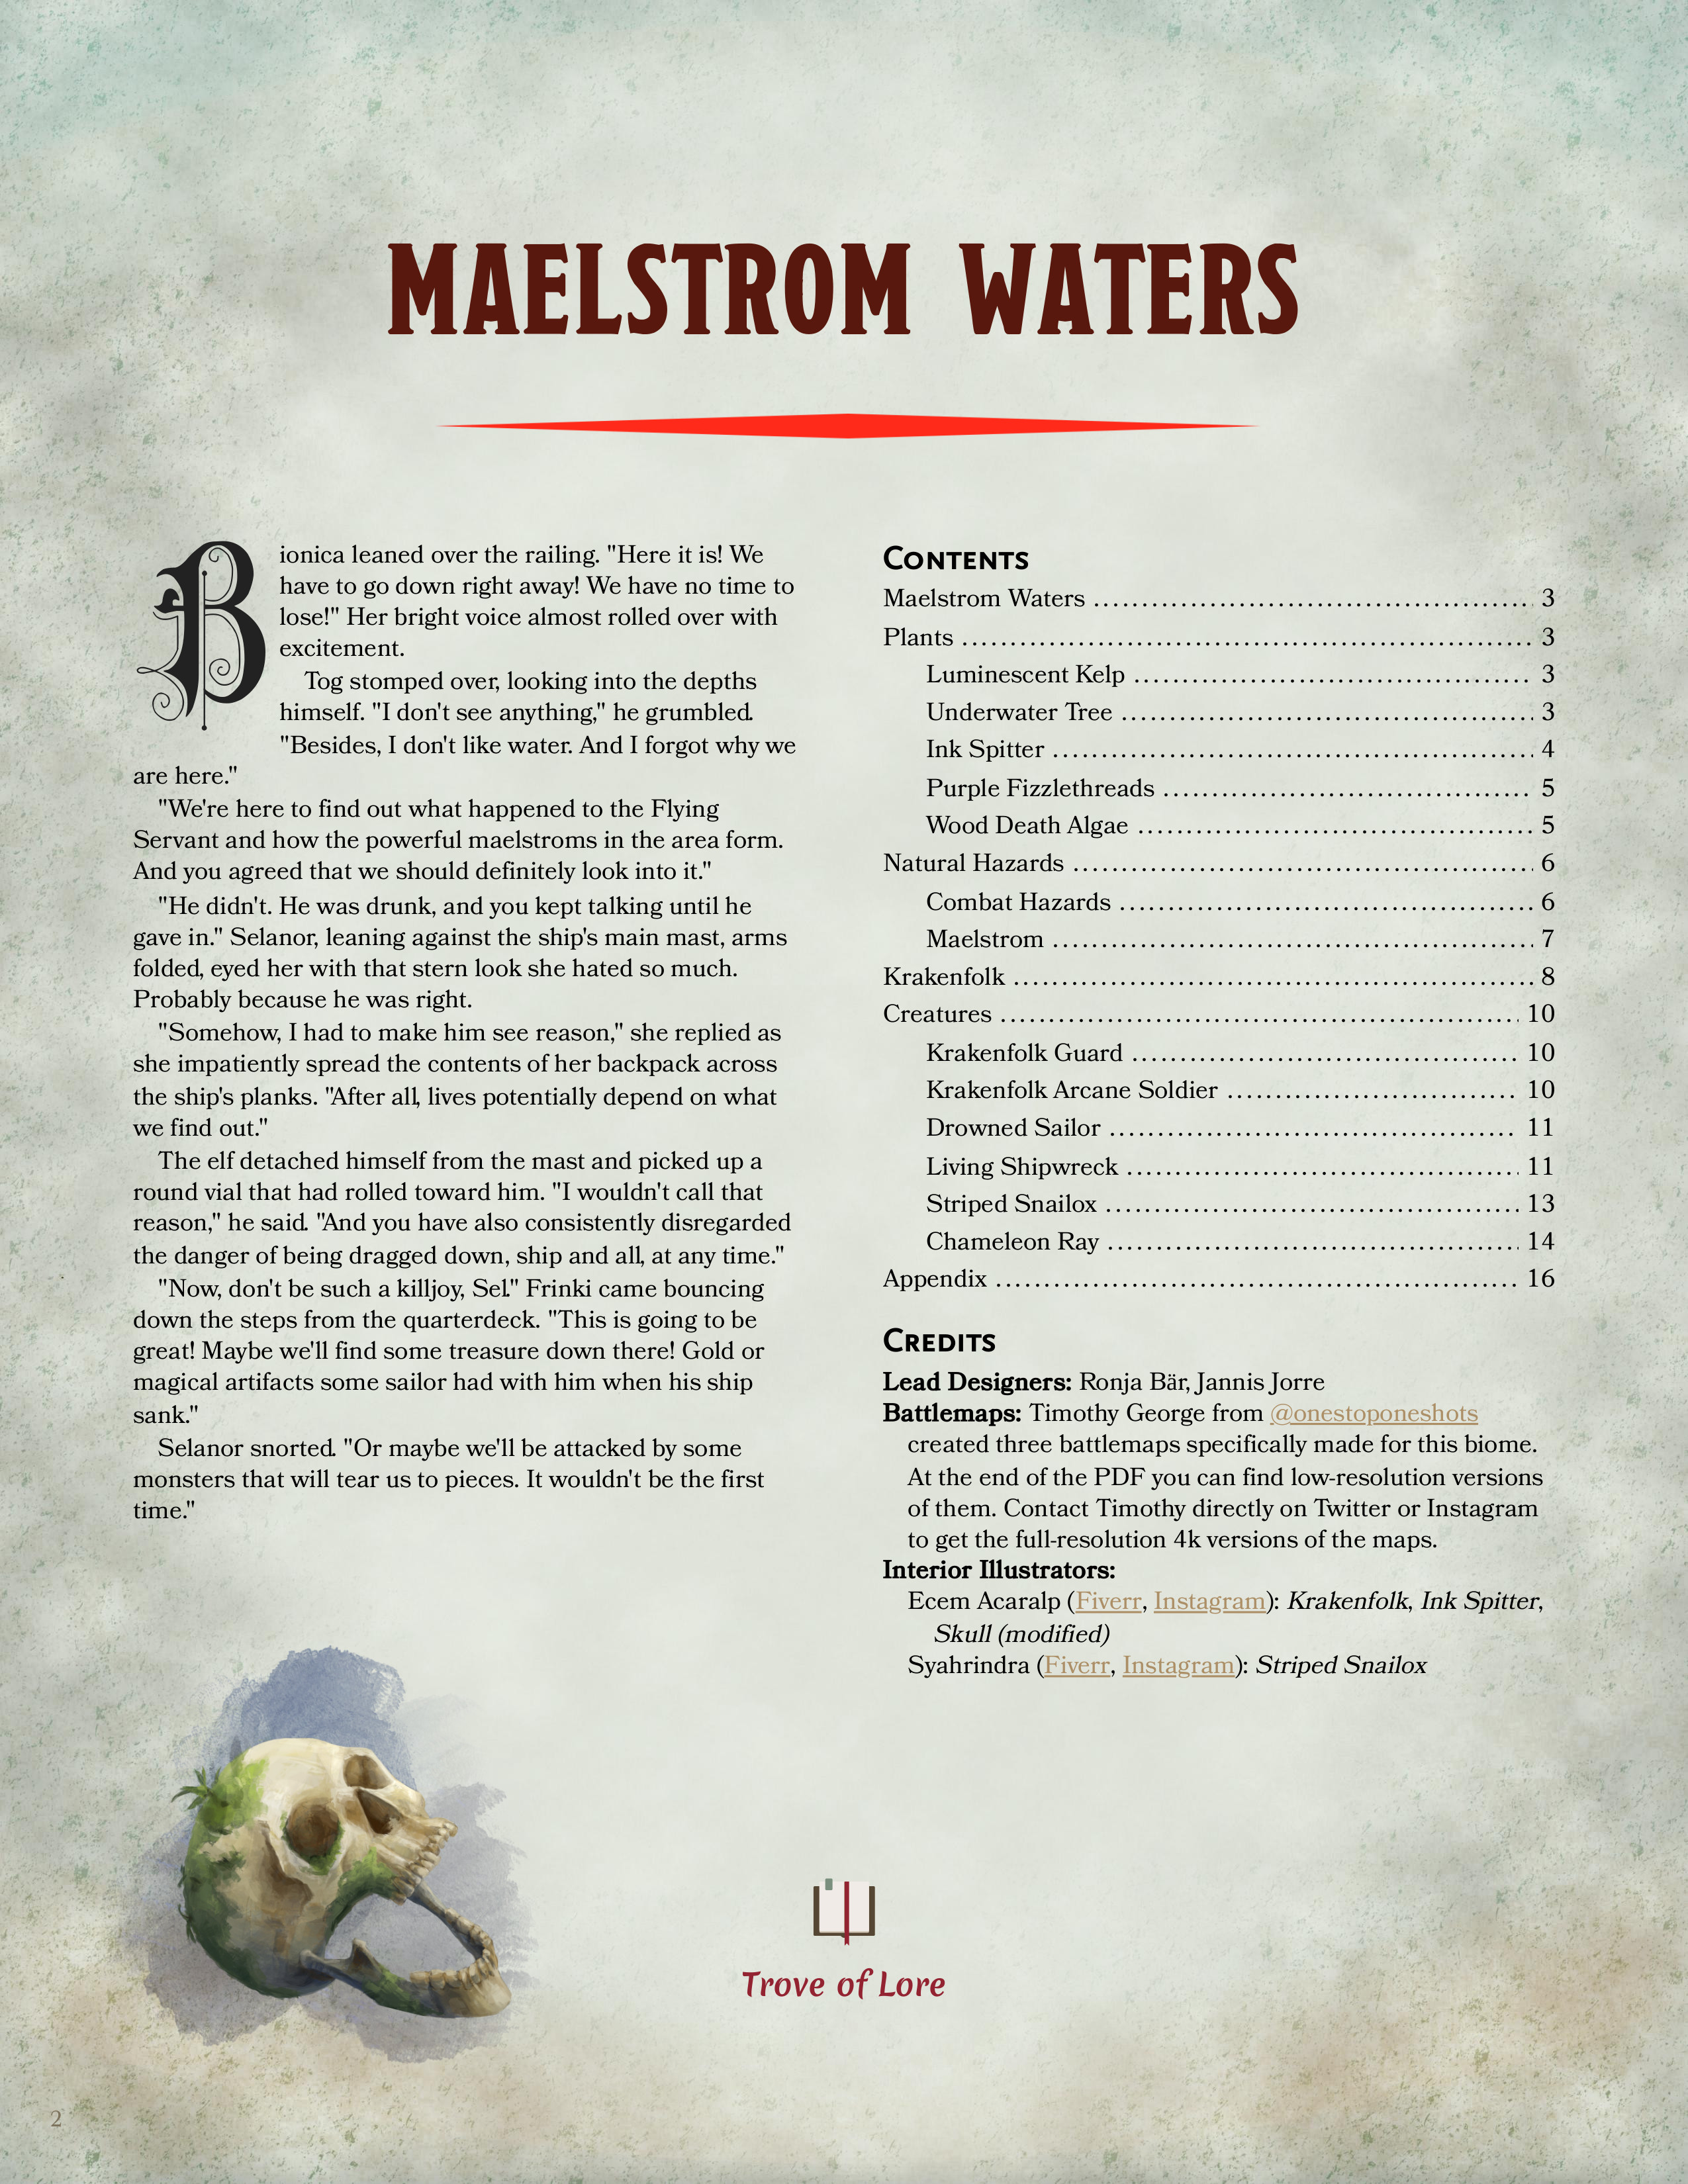 The cover for: Maelstrom Waters — An underwater biome.